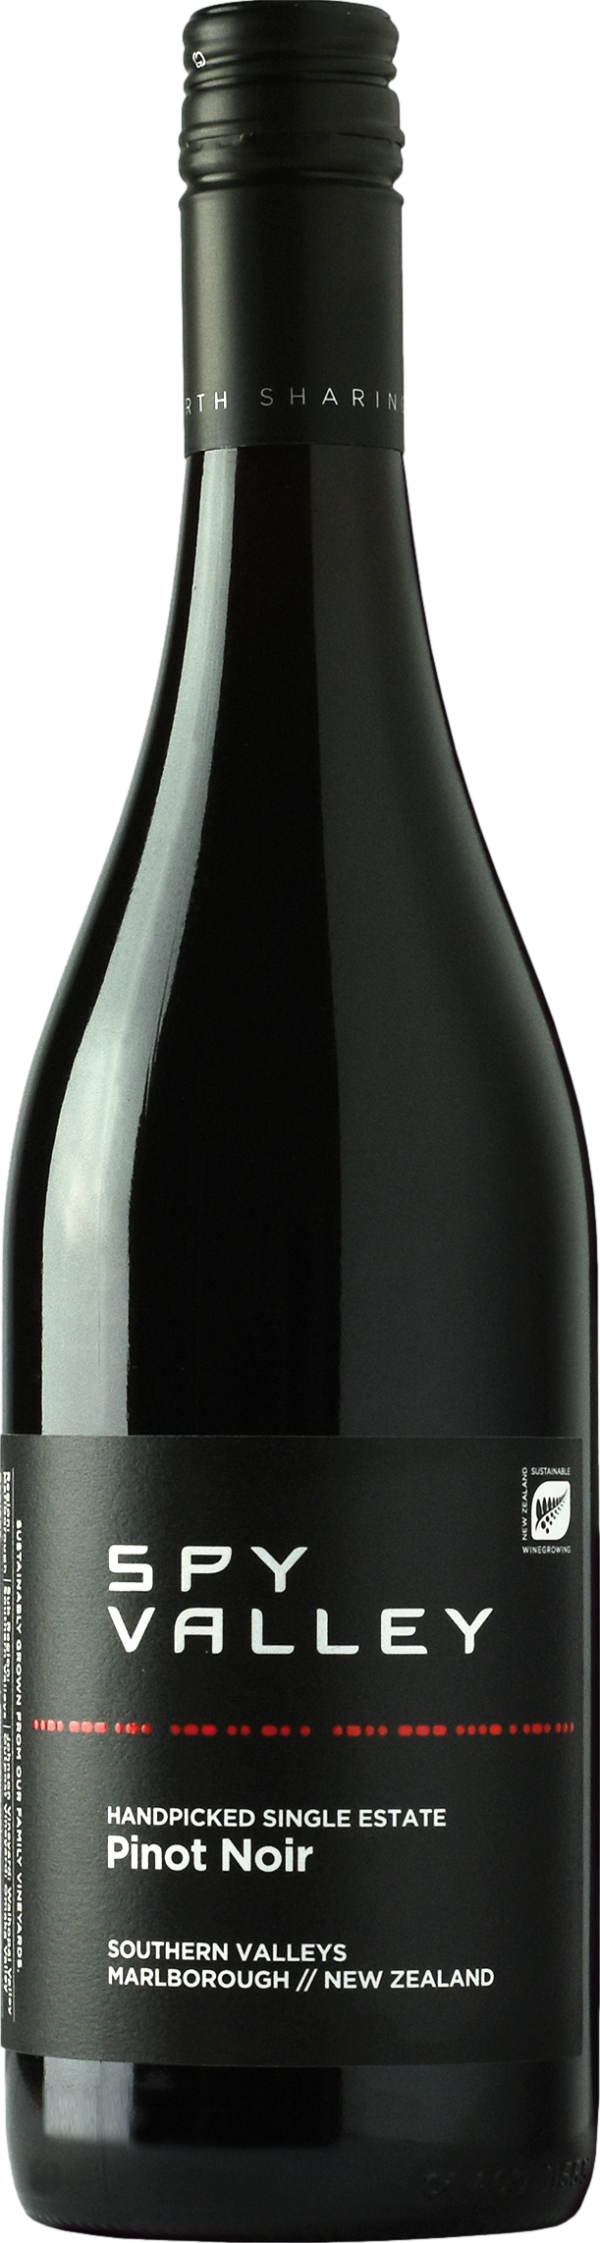 Product image of Spy Valley Pinot Noir 2020 from 8wines